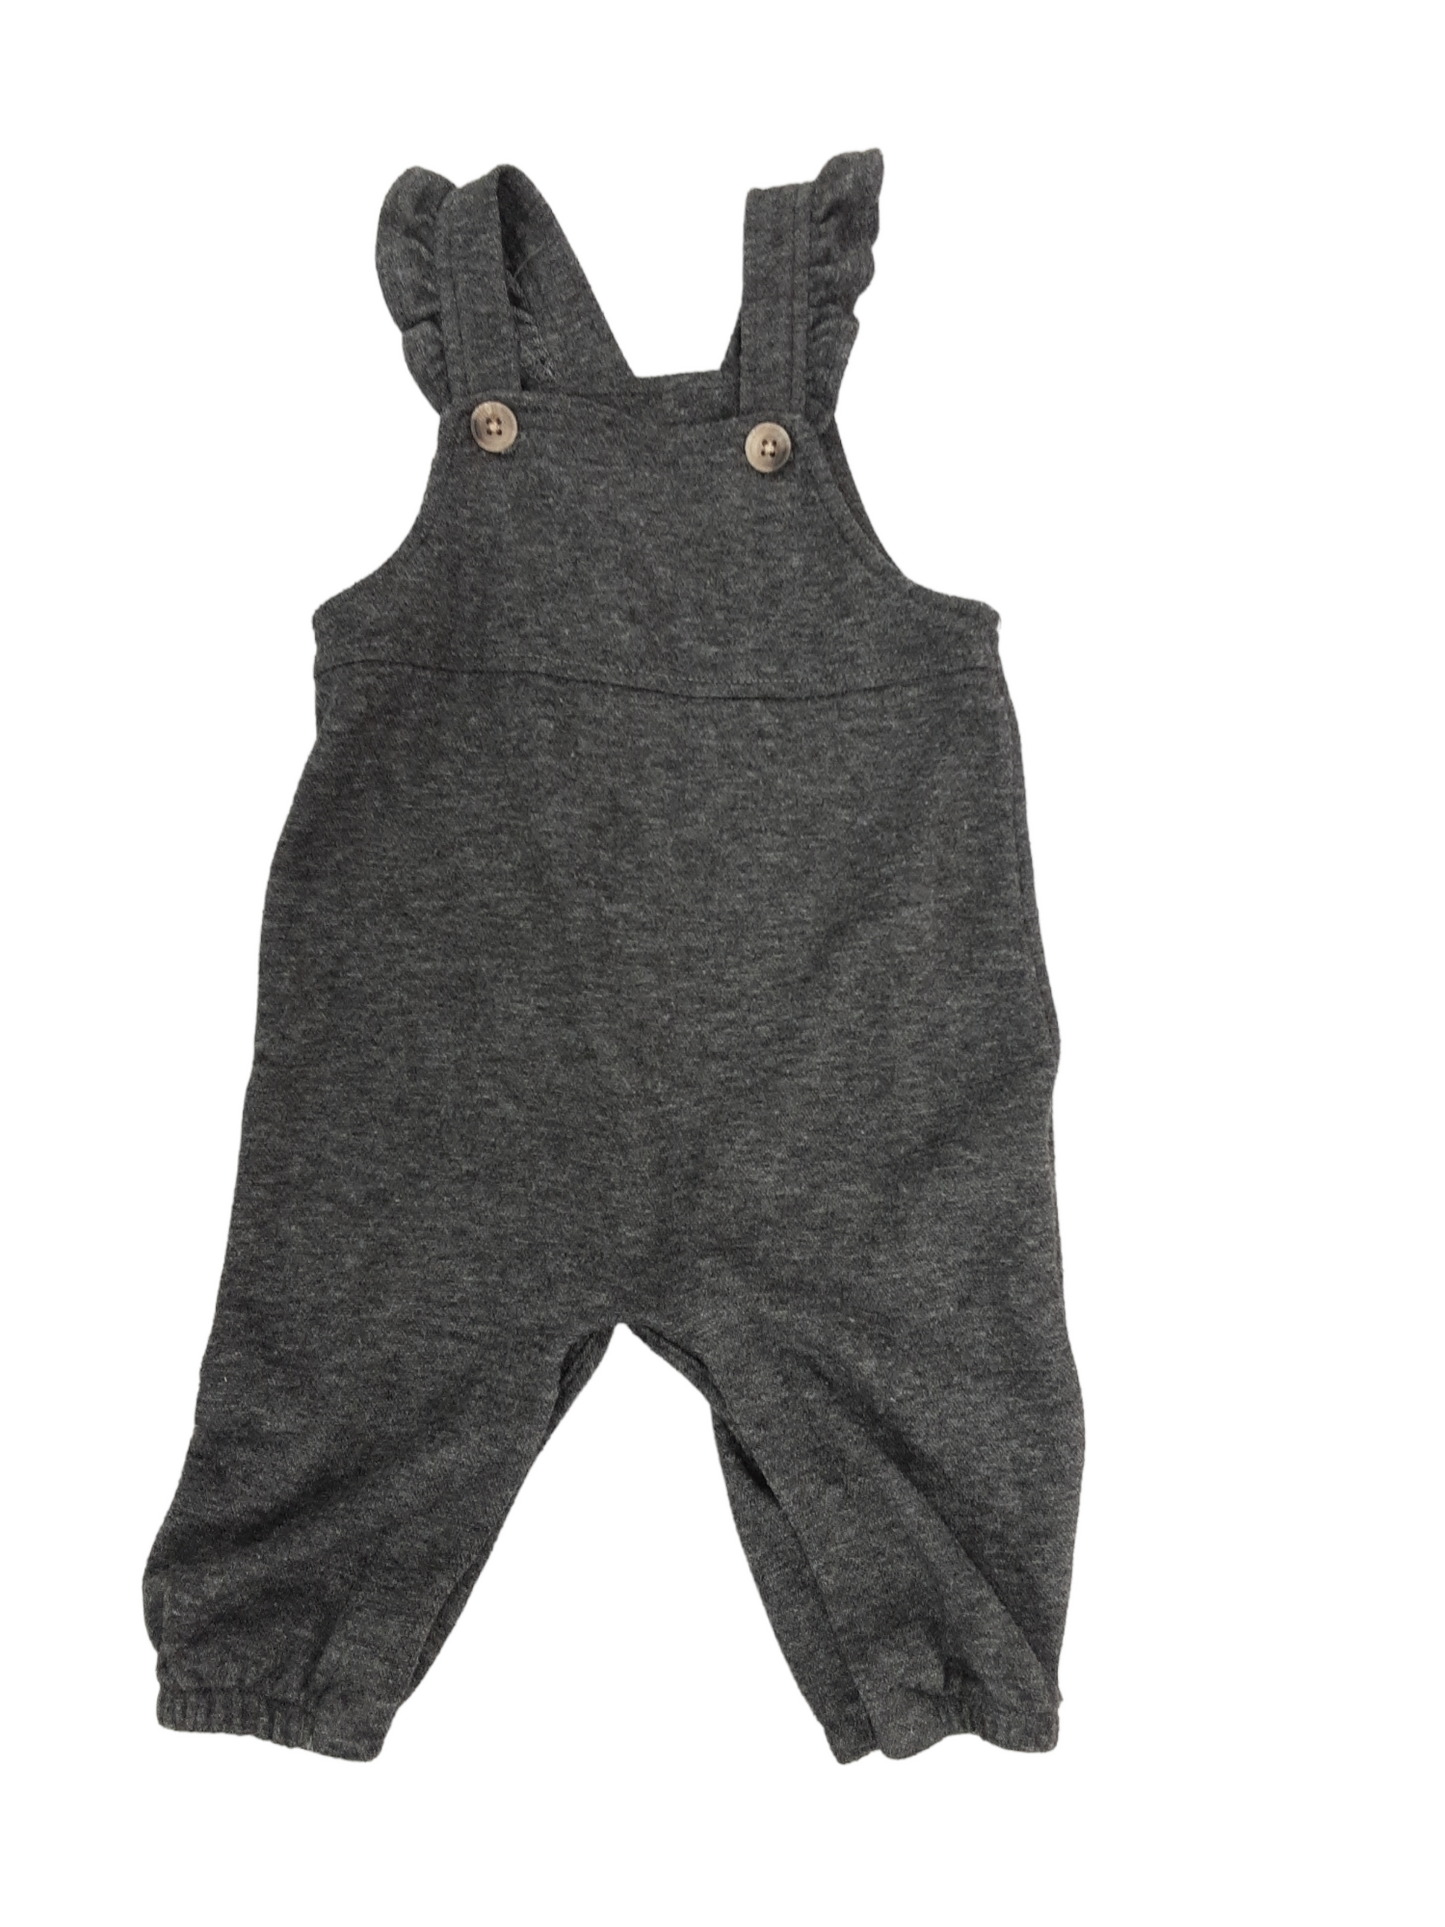 Super soft overalls size 3 to 6 months